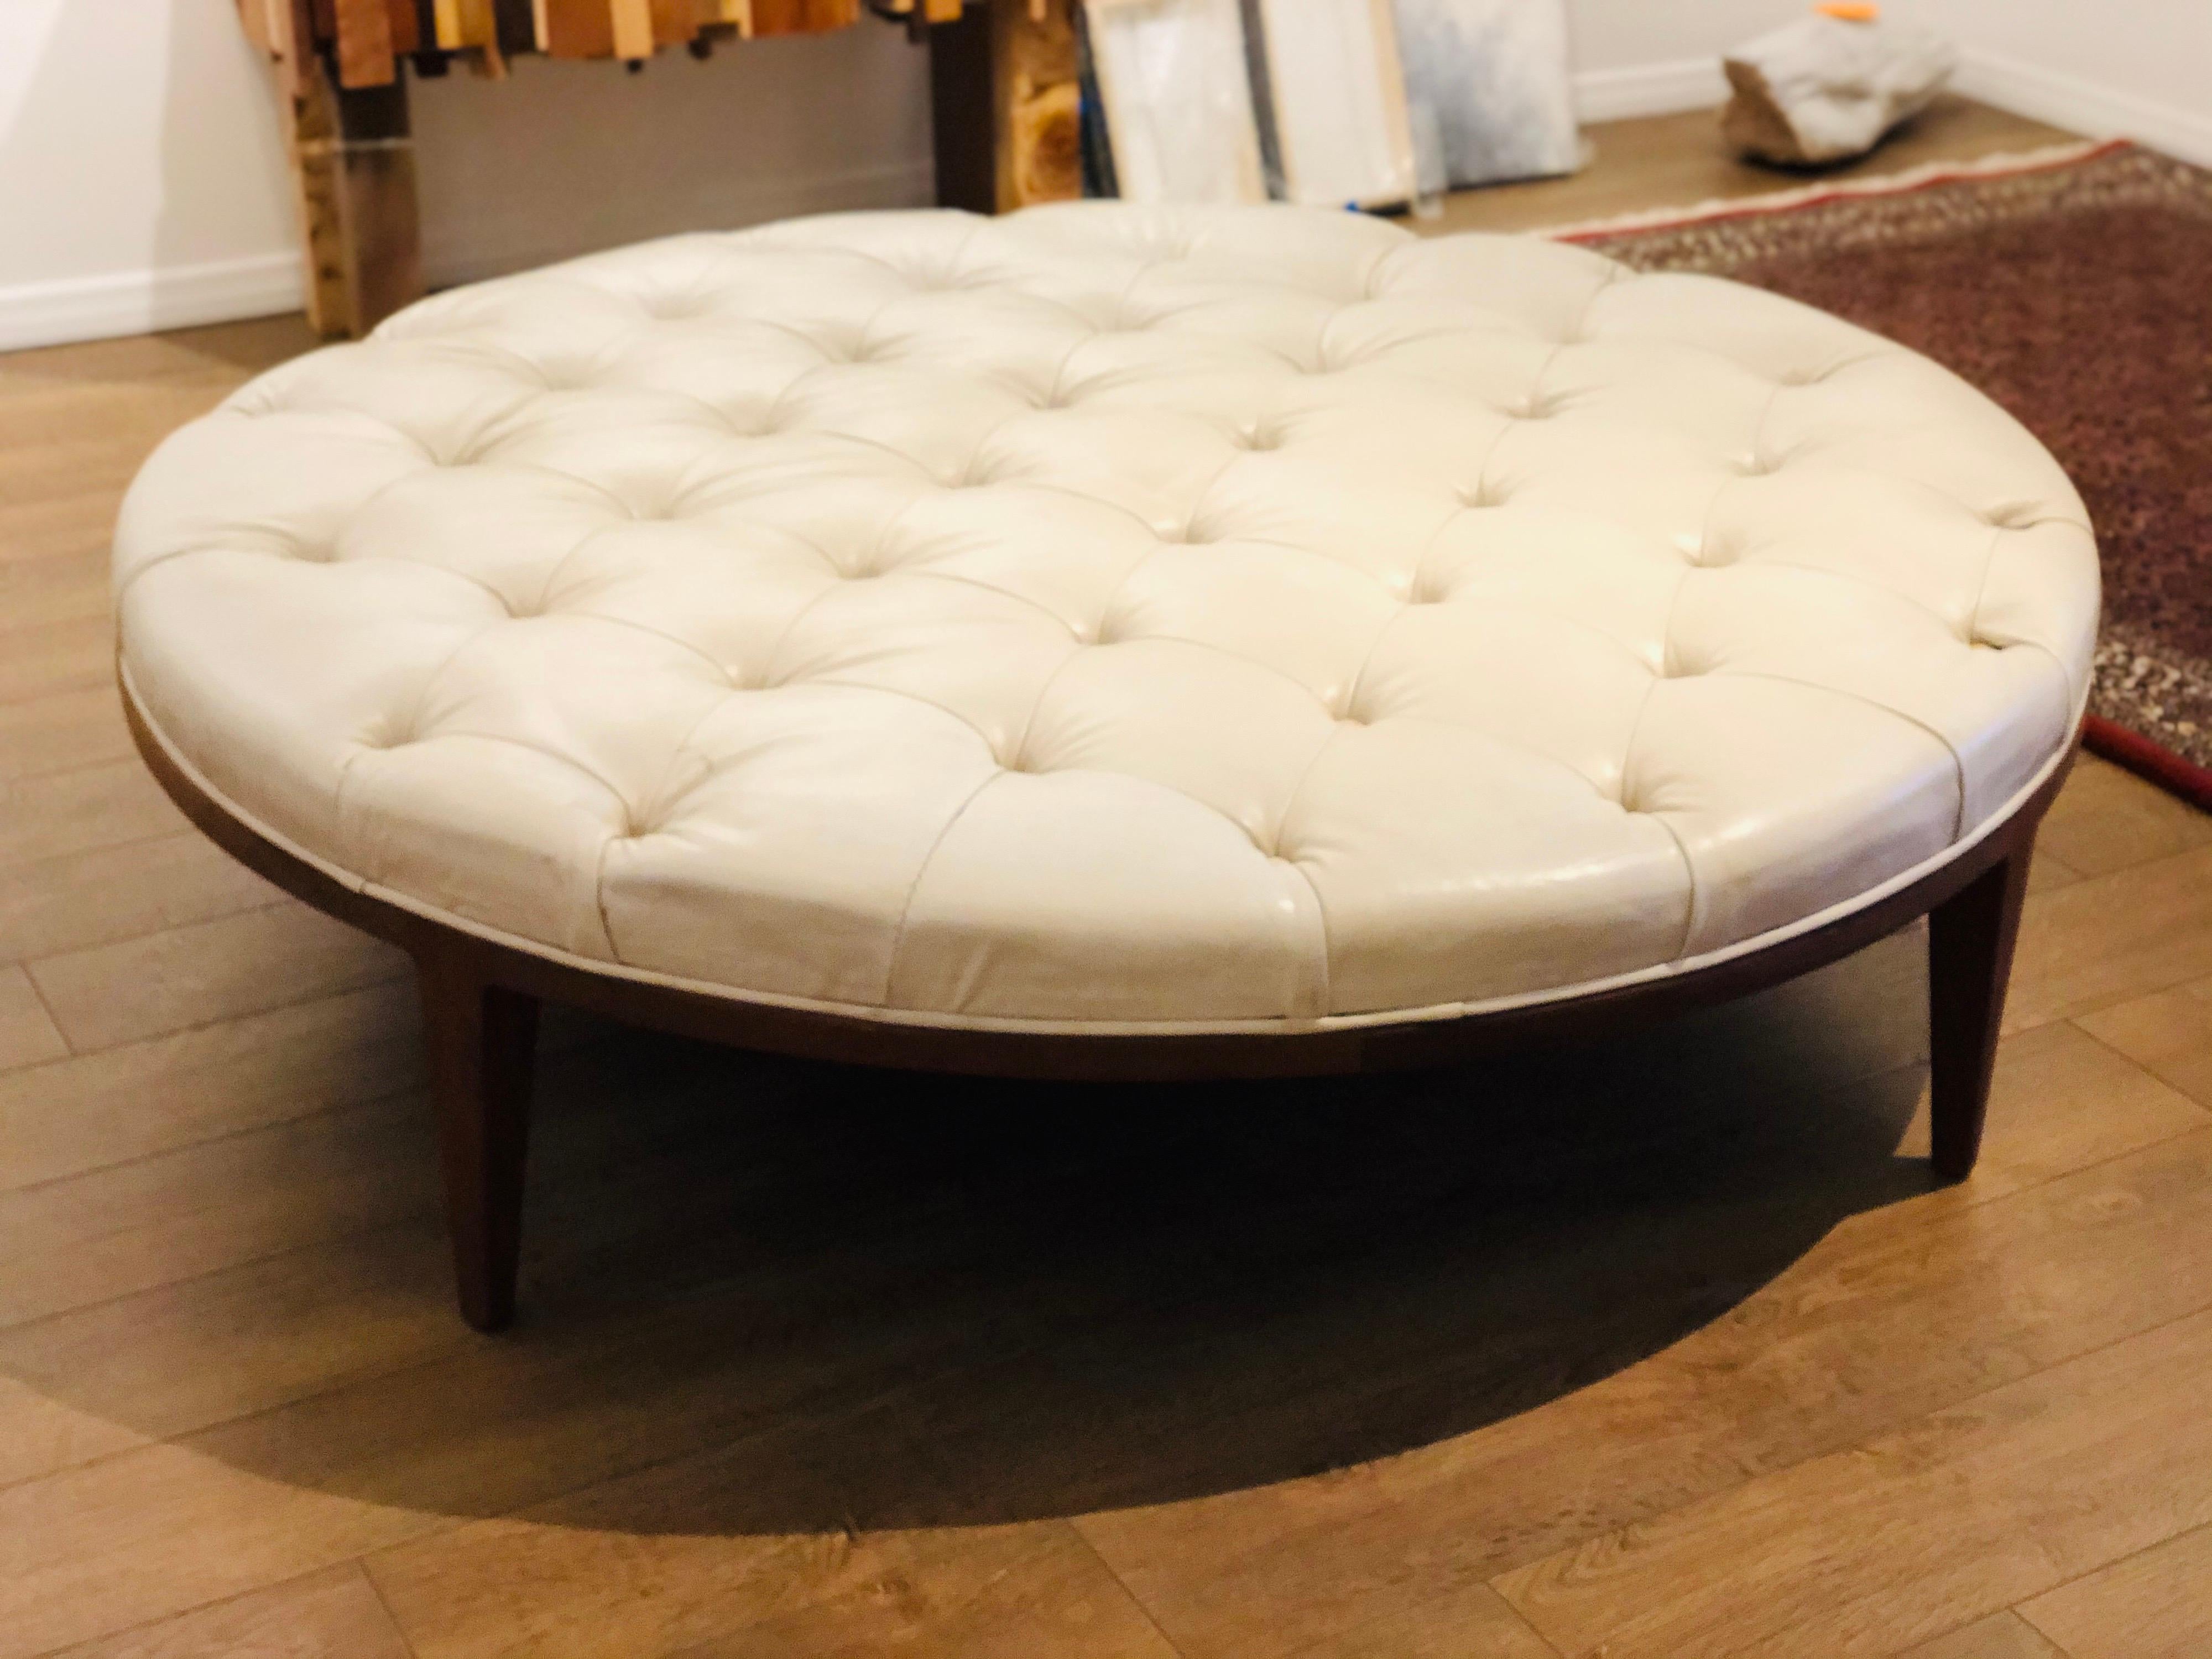 Beautiful very rare giant ottoman/coffee table in tufted leather and solid walnut base, we have refinished the base looks great the top leather shows some wear due to age overall it's ok. We belive it's manufactured by Drexel.